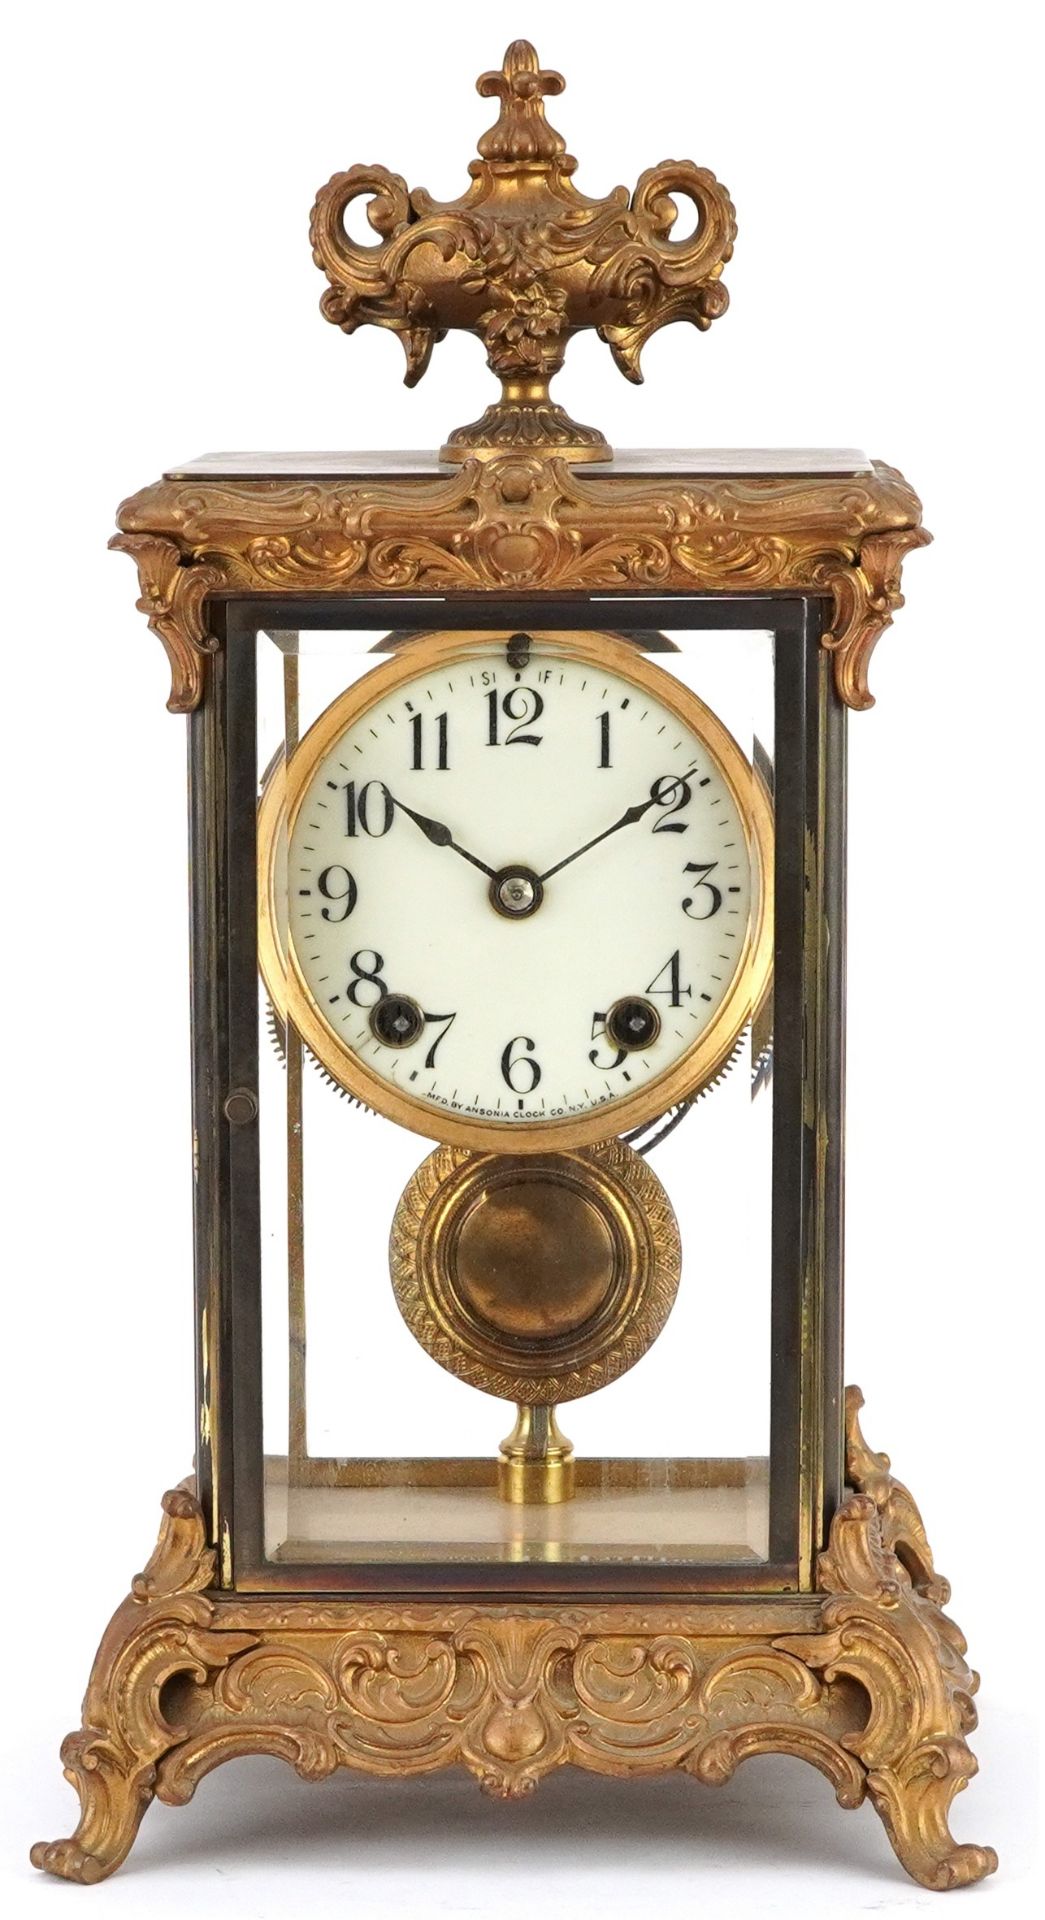 19th century ormolu four glass mantle clock striking on a gong with urn finial and circular - Image 2 of 8